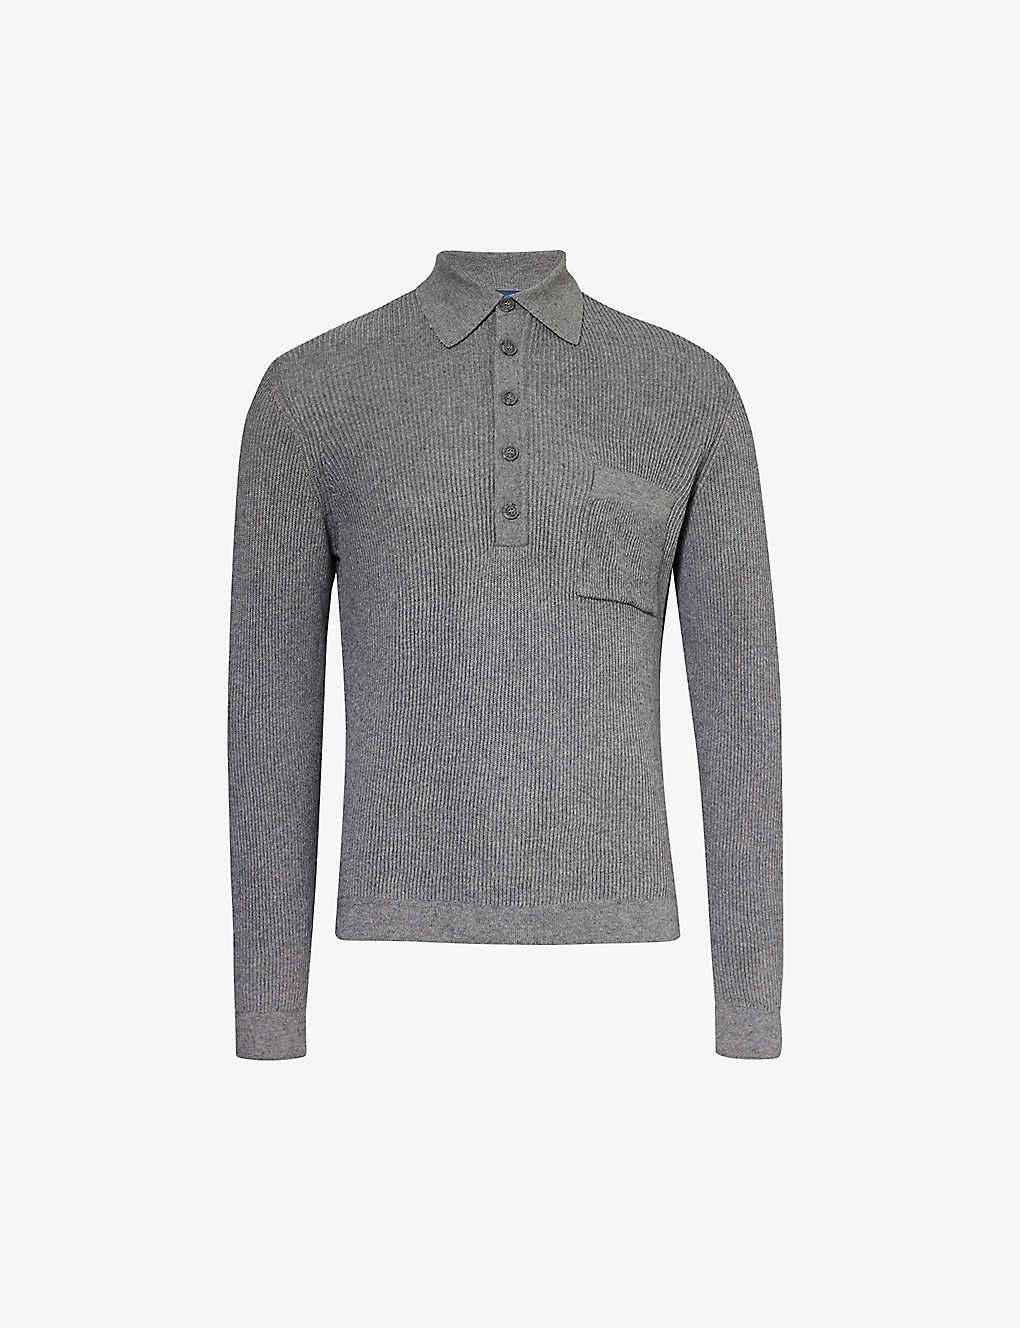 Frescobol Carioca Murilo Cotton And Wool Polo Shirt In Stone Grey